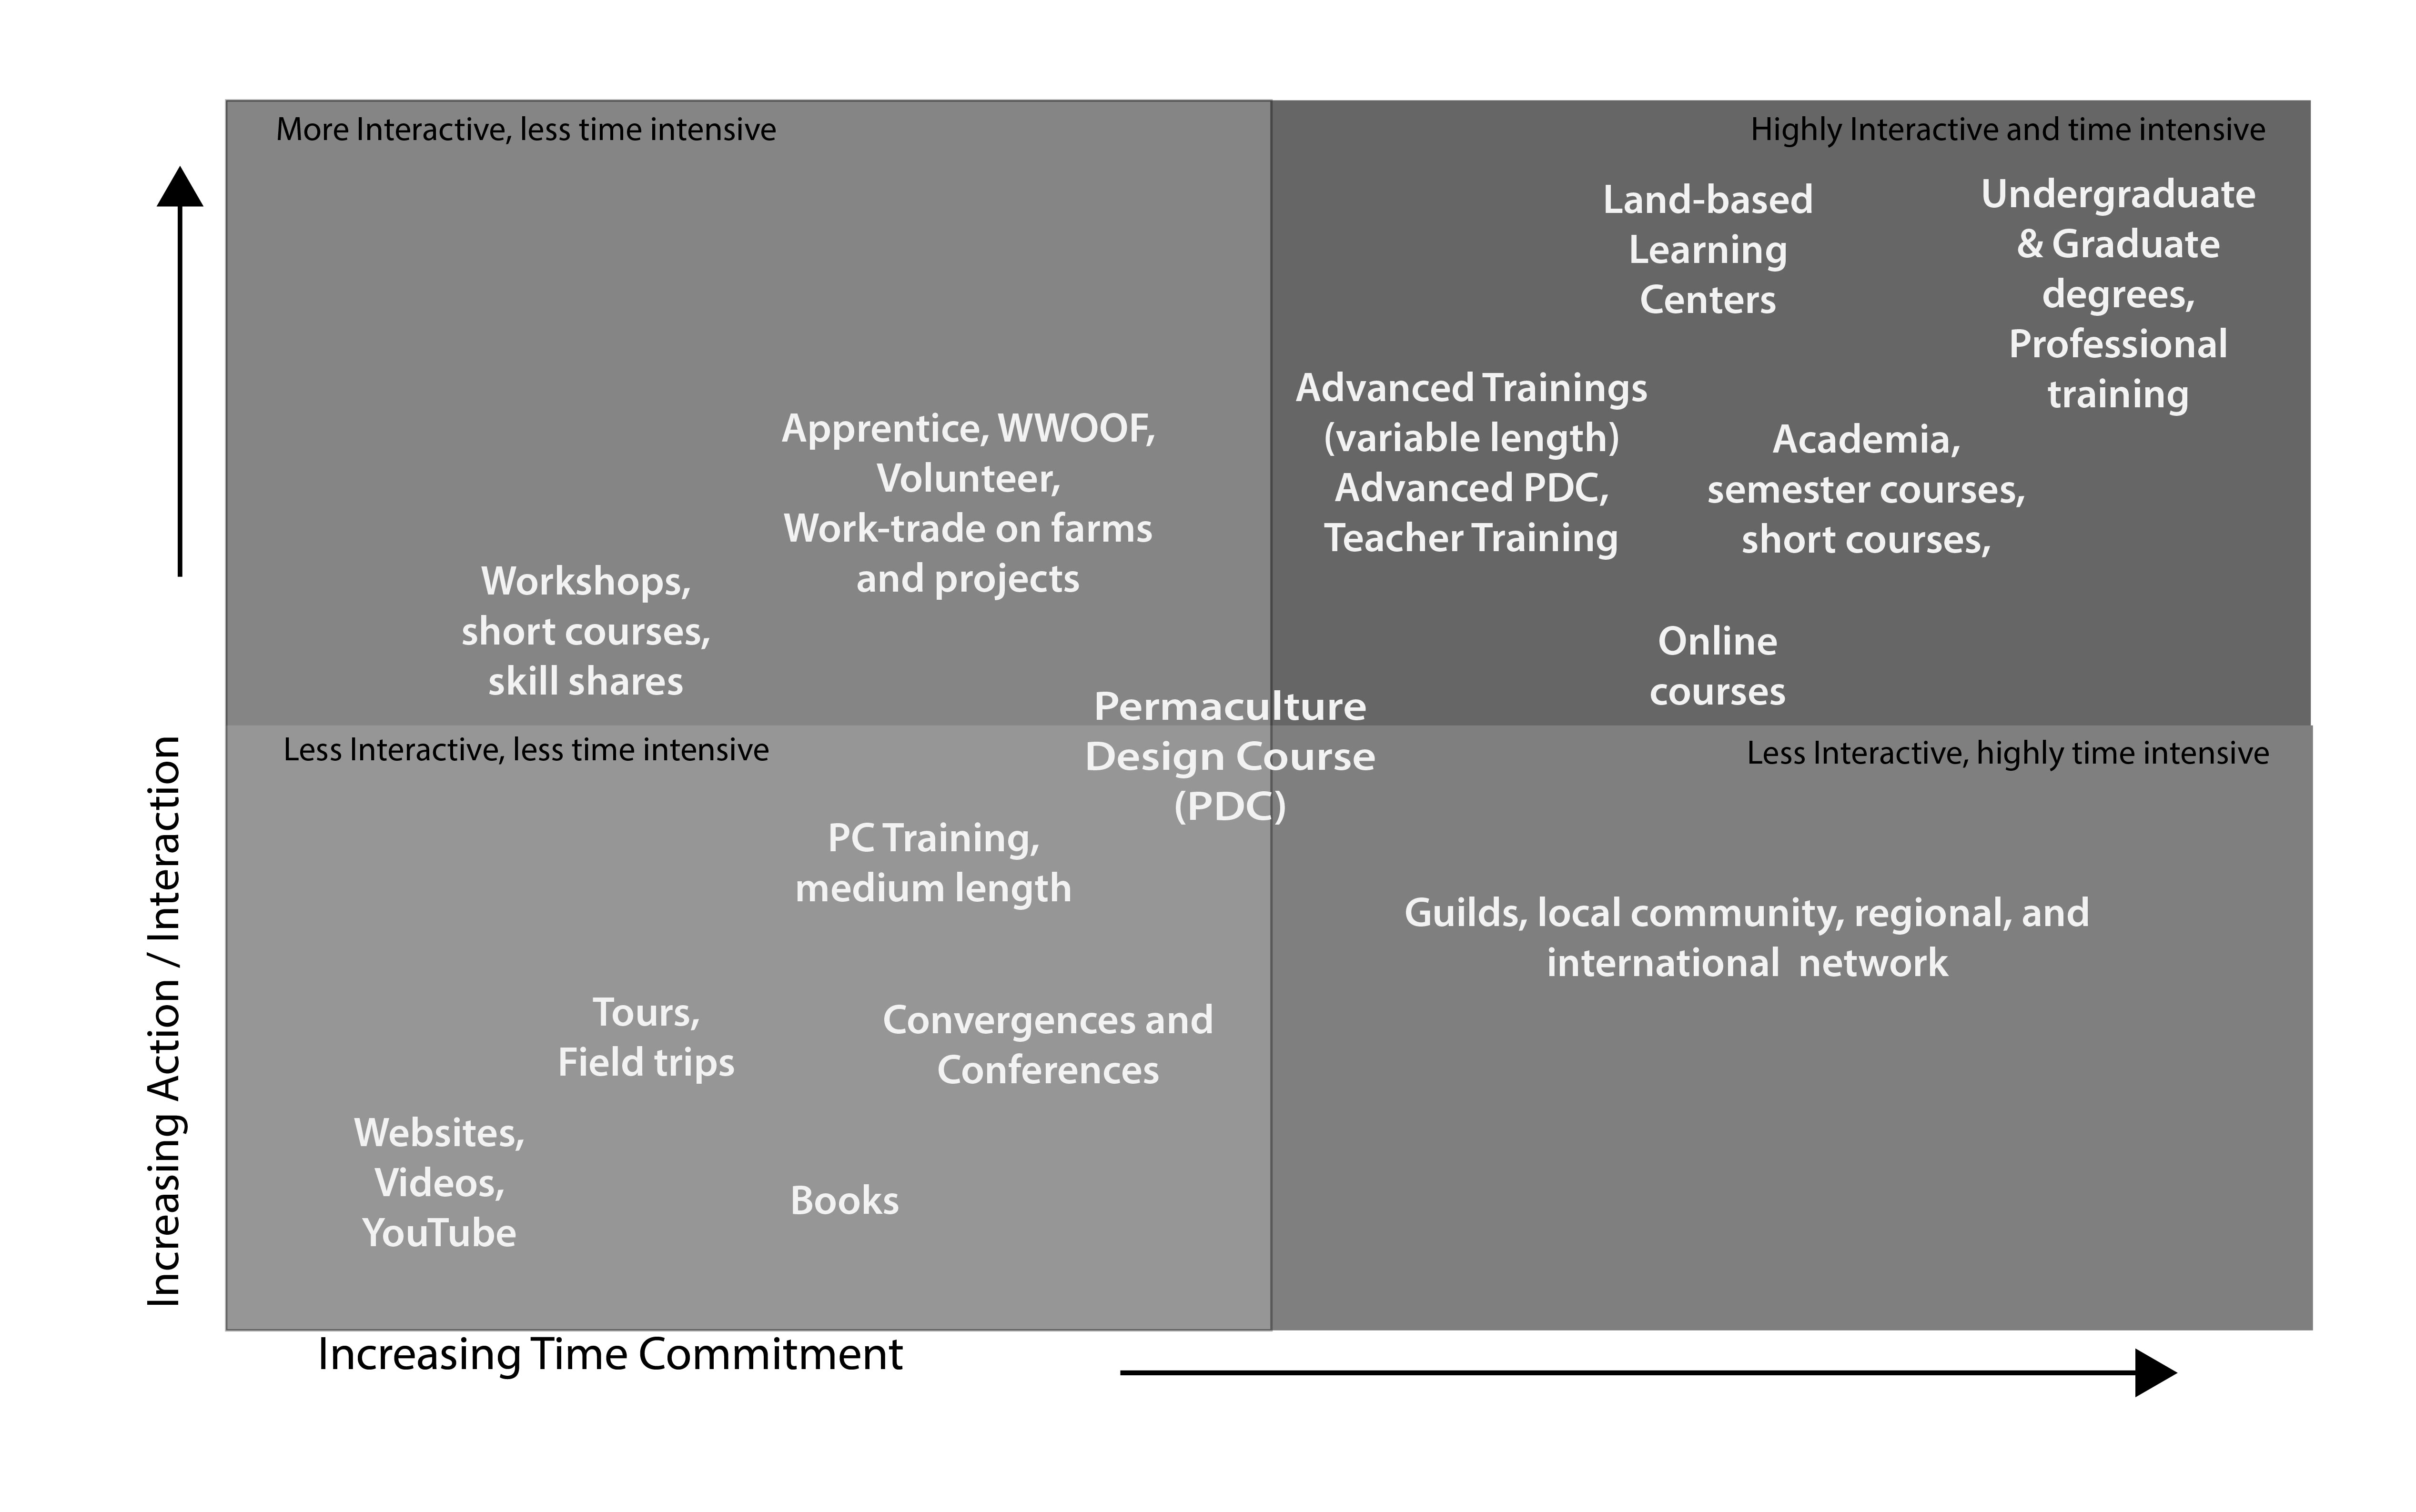 The map shows elements of the permaculture education ecosystem organized by time commitment and personal interaction.